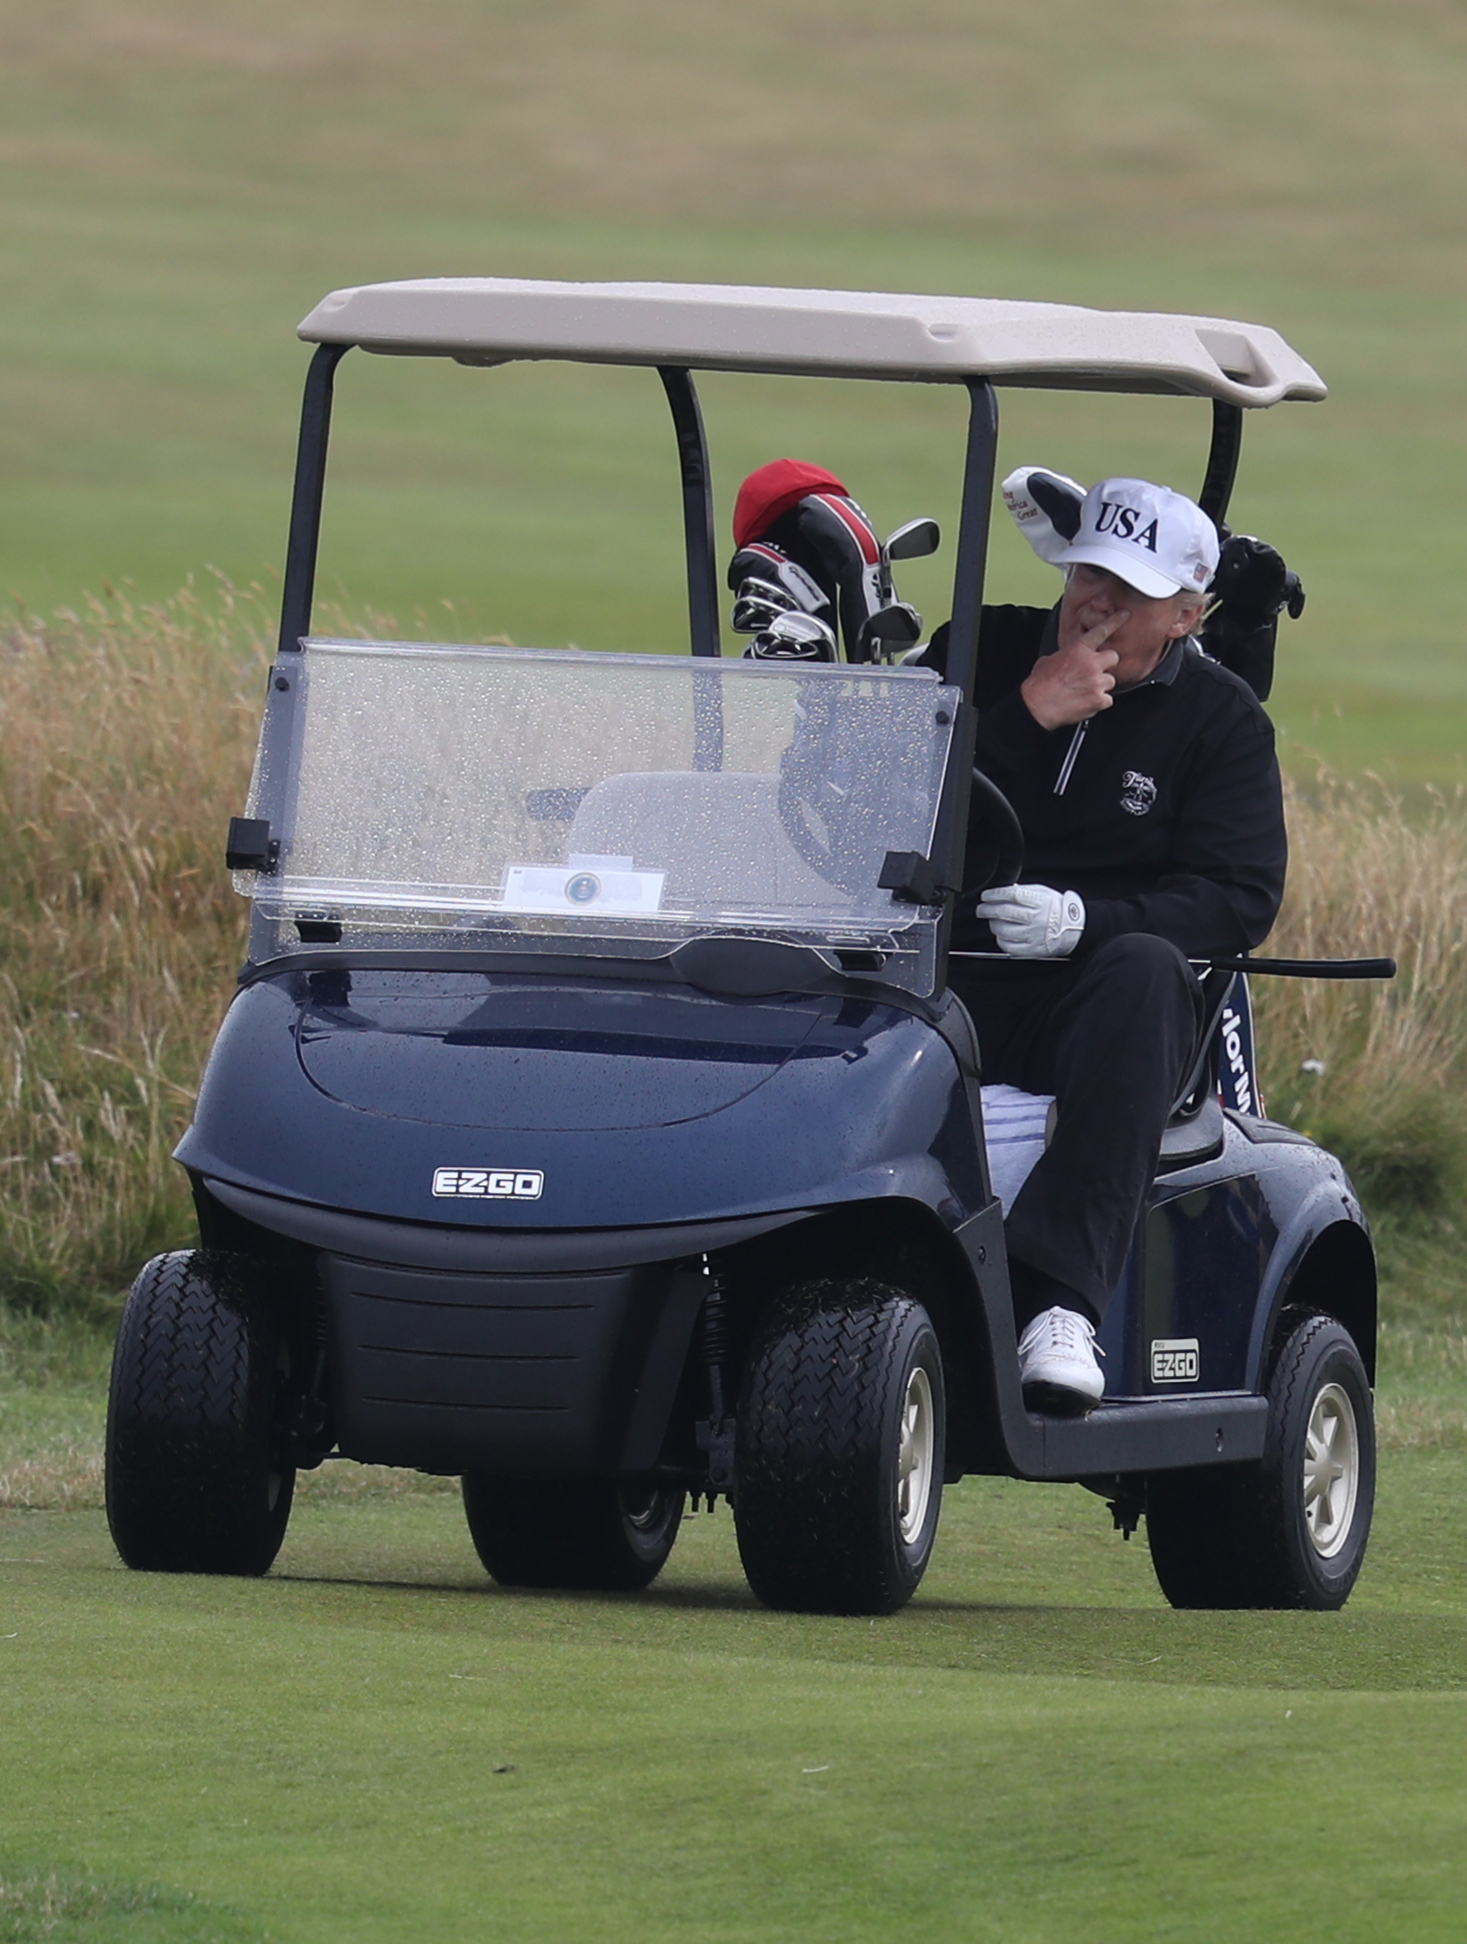 Former president Donald Trump driving an electric golf buggy on his golf course at the Trump Turnberry resort in South Ayrshire - this buggy is apparently based on the Carter Coaster, a pioneering electric vehicle designed by a Northallerton man